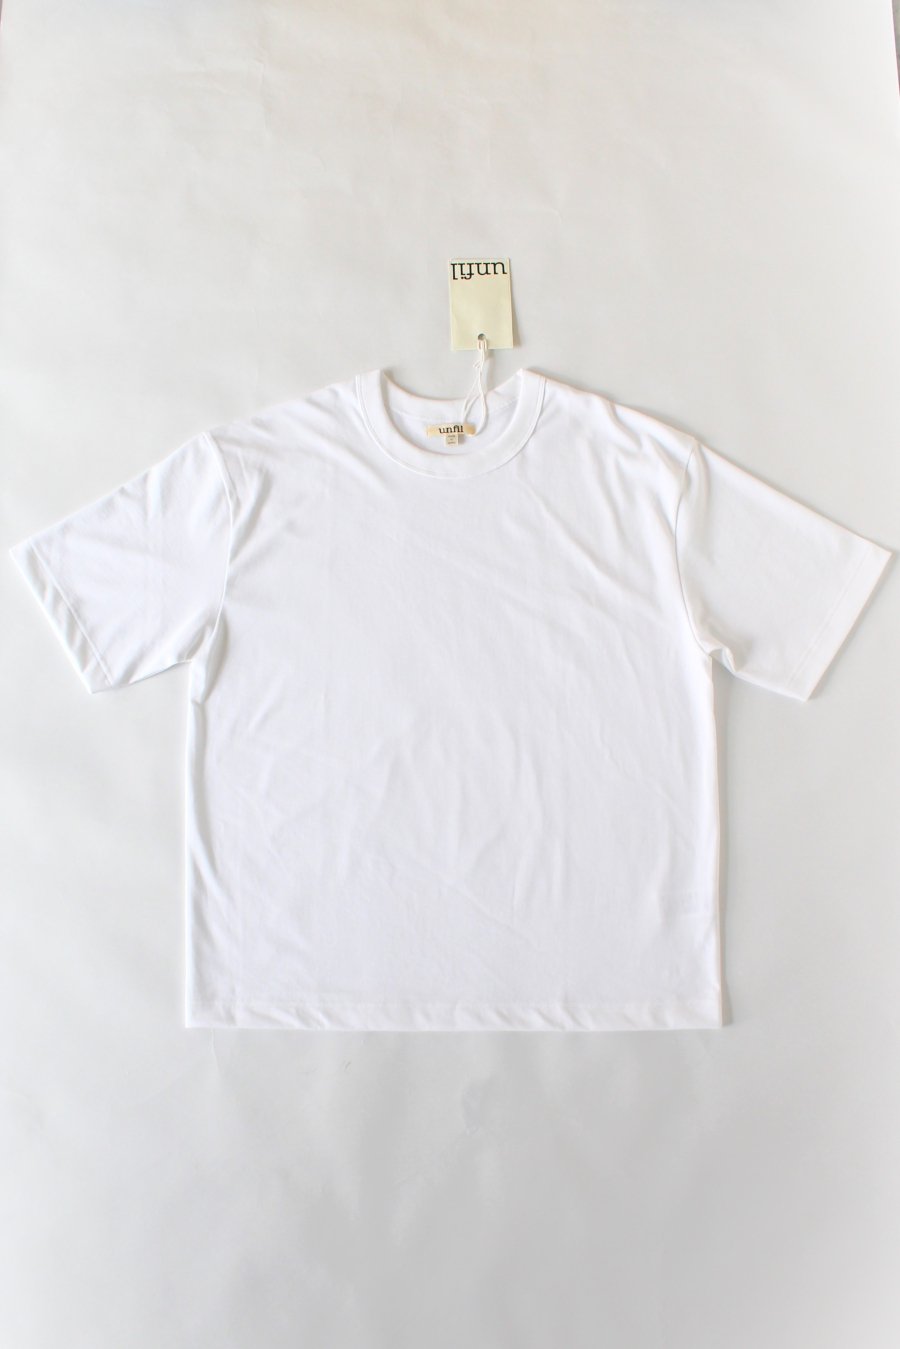 unfil（アンフィル）organic cotton jersey relax fit Tee 公式通販